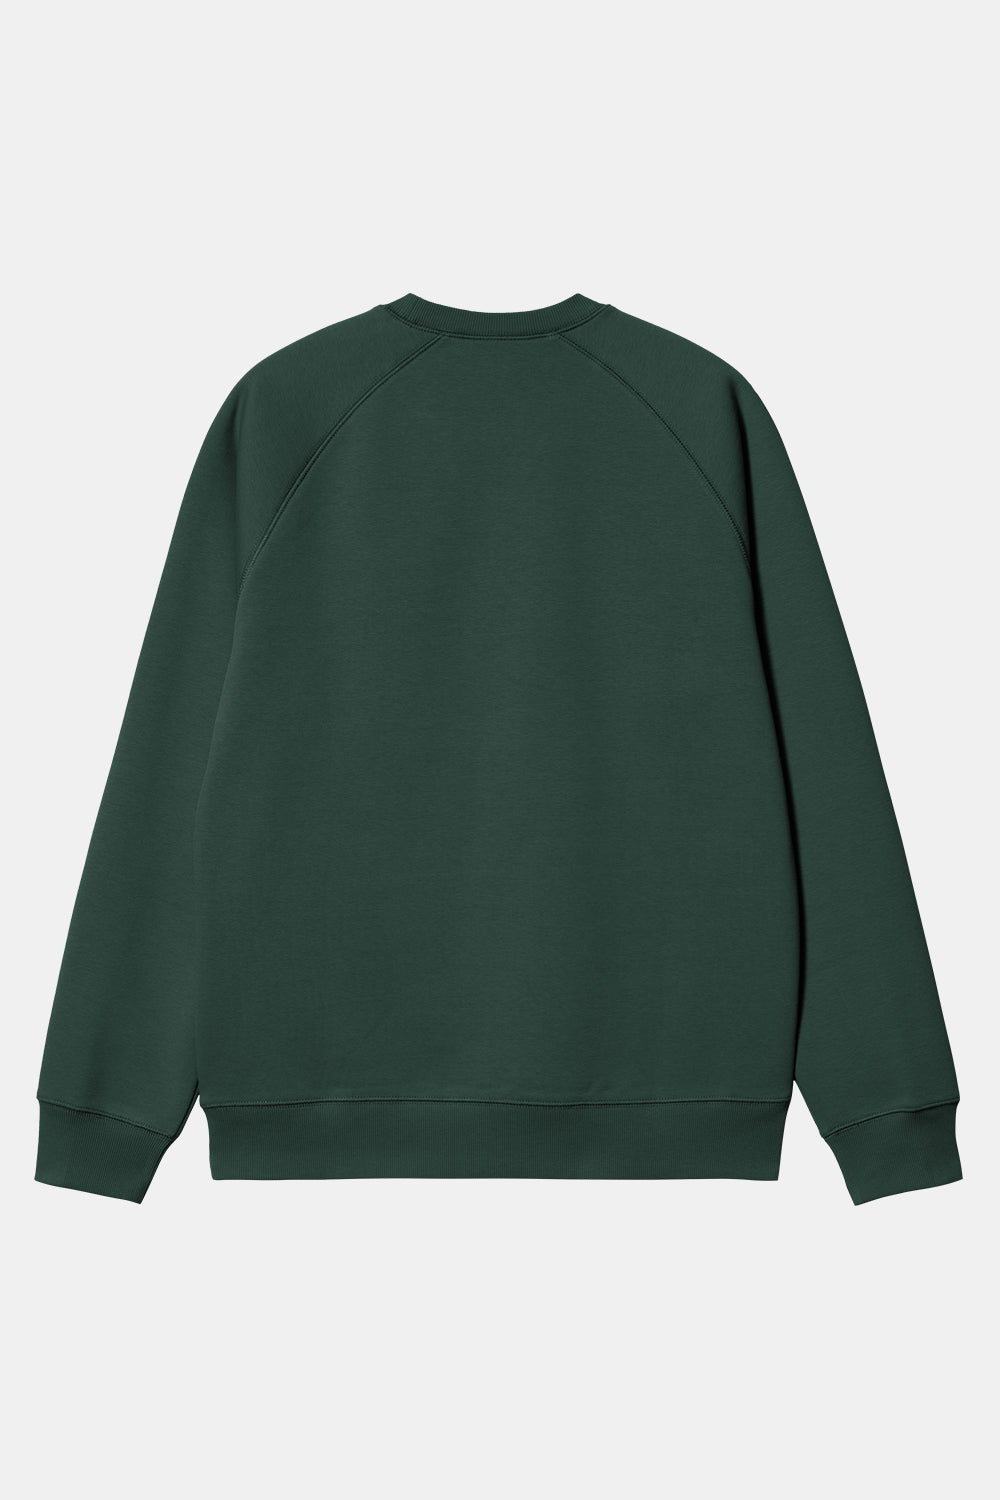 Carhartt WIP Chase Sweat (Discovery Green/Gold)